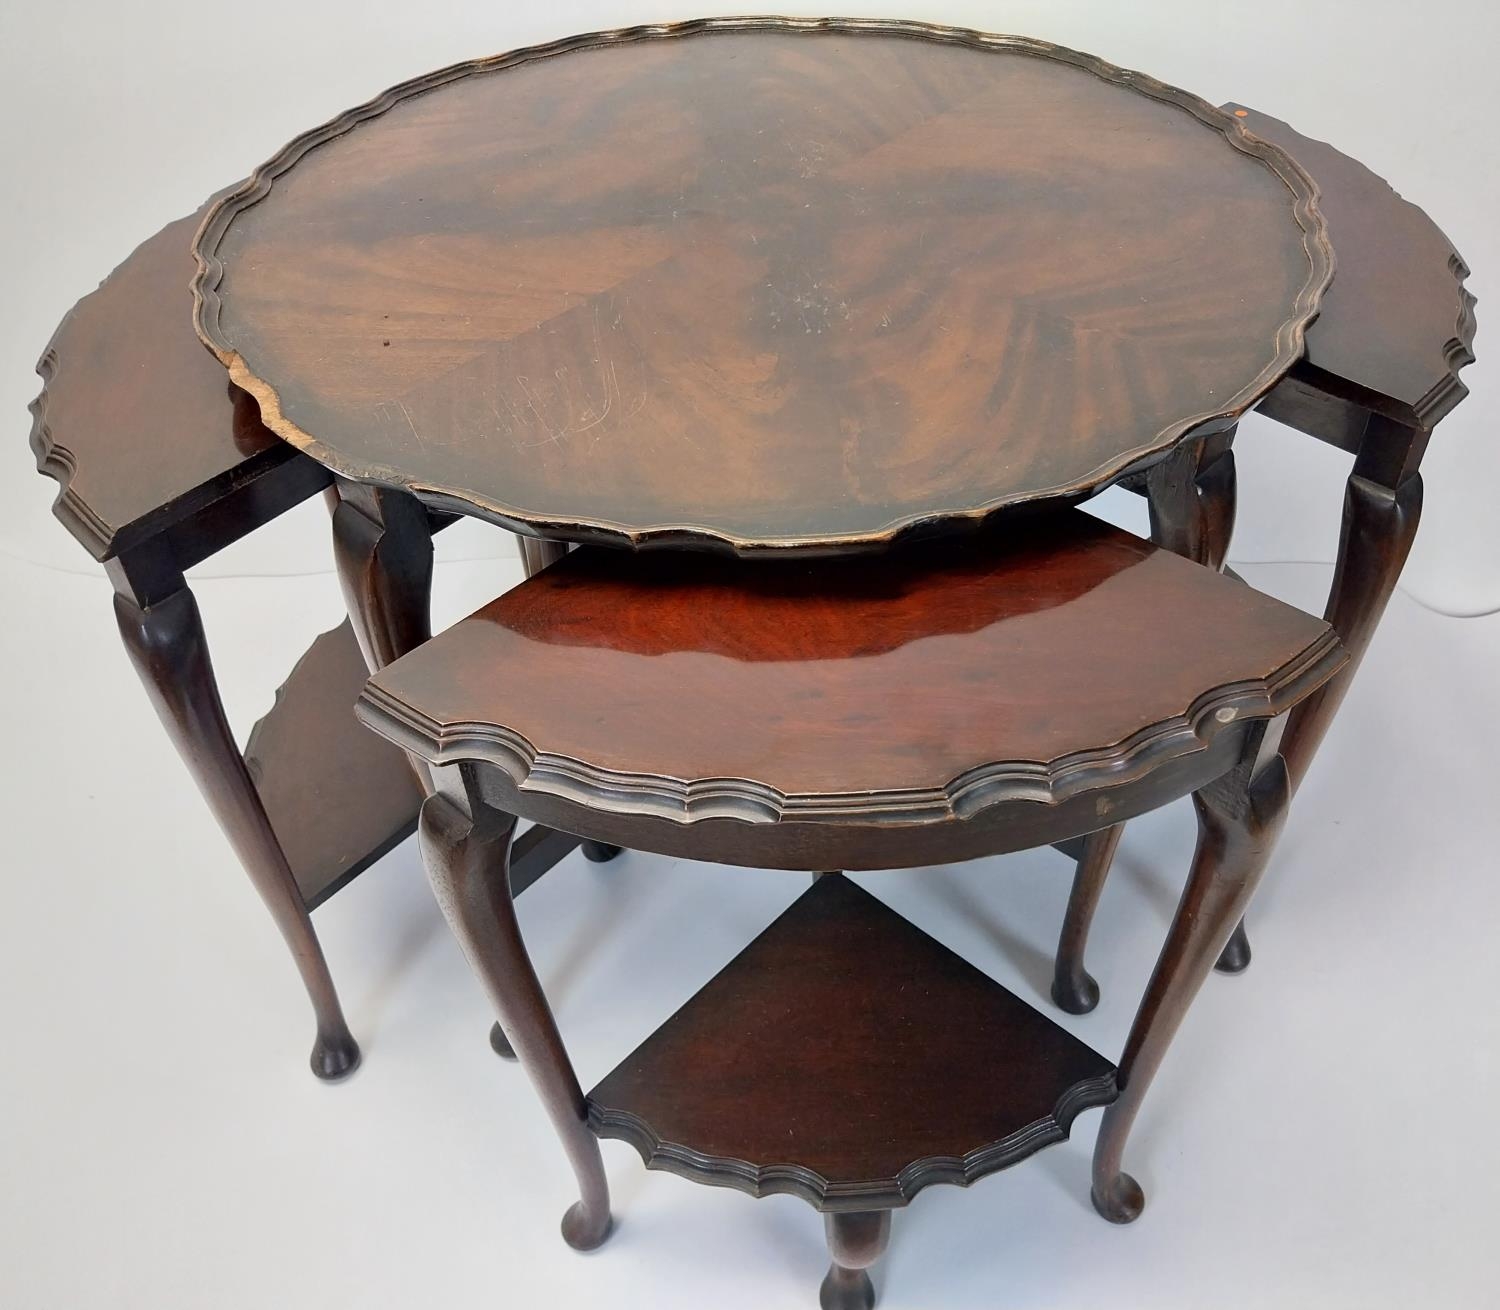 Nest of tables, vintage mahogany. H.54.5 Dia.64 cm - Image 3 of 6